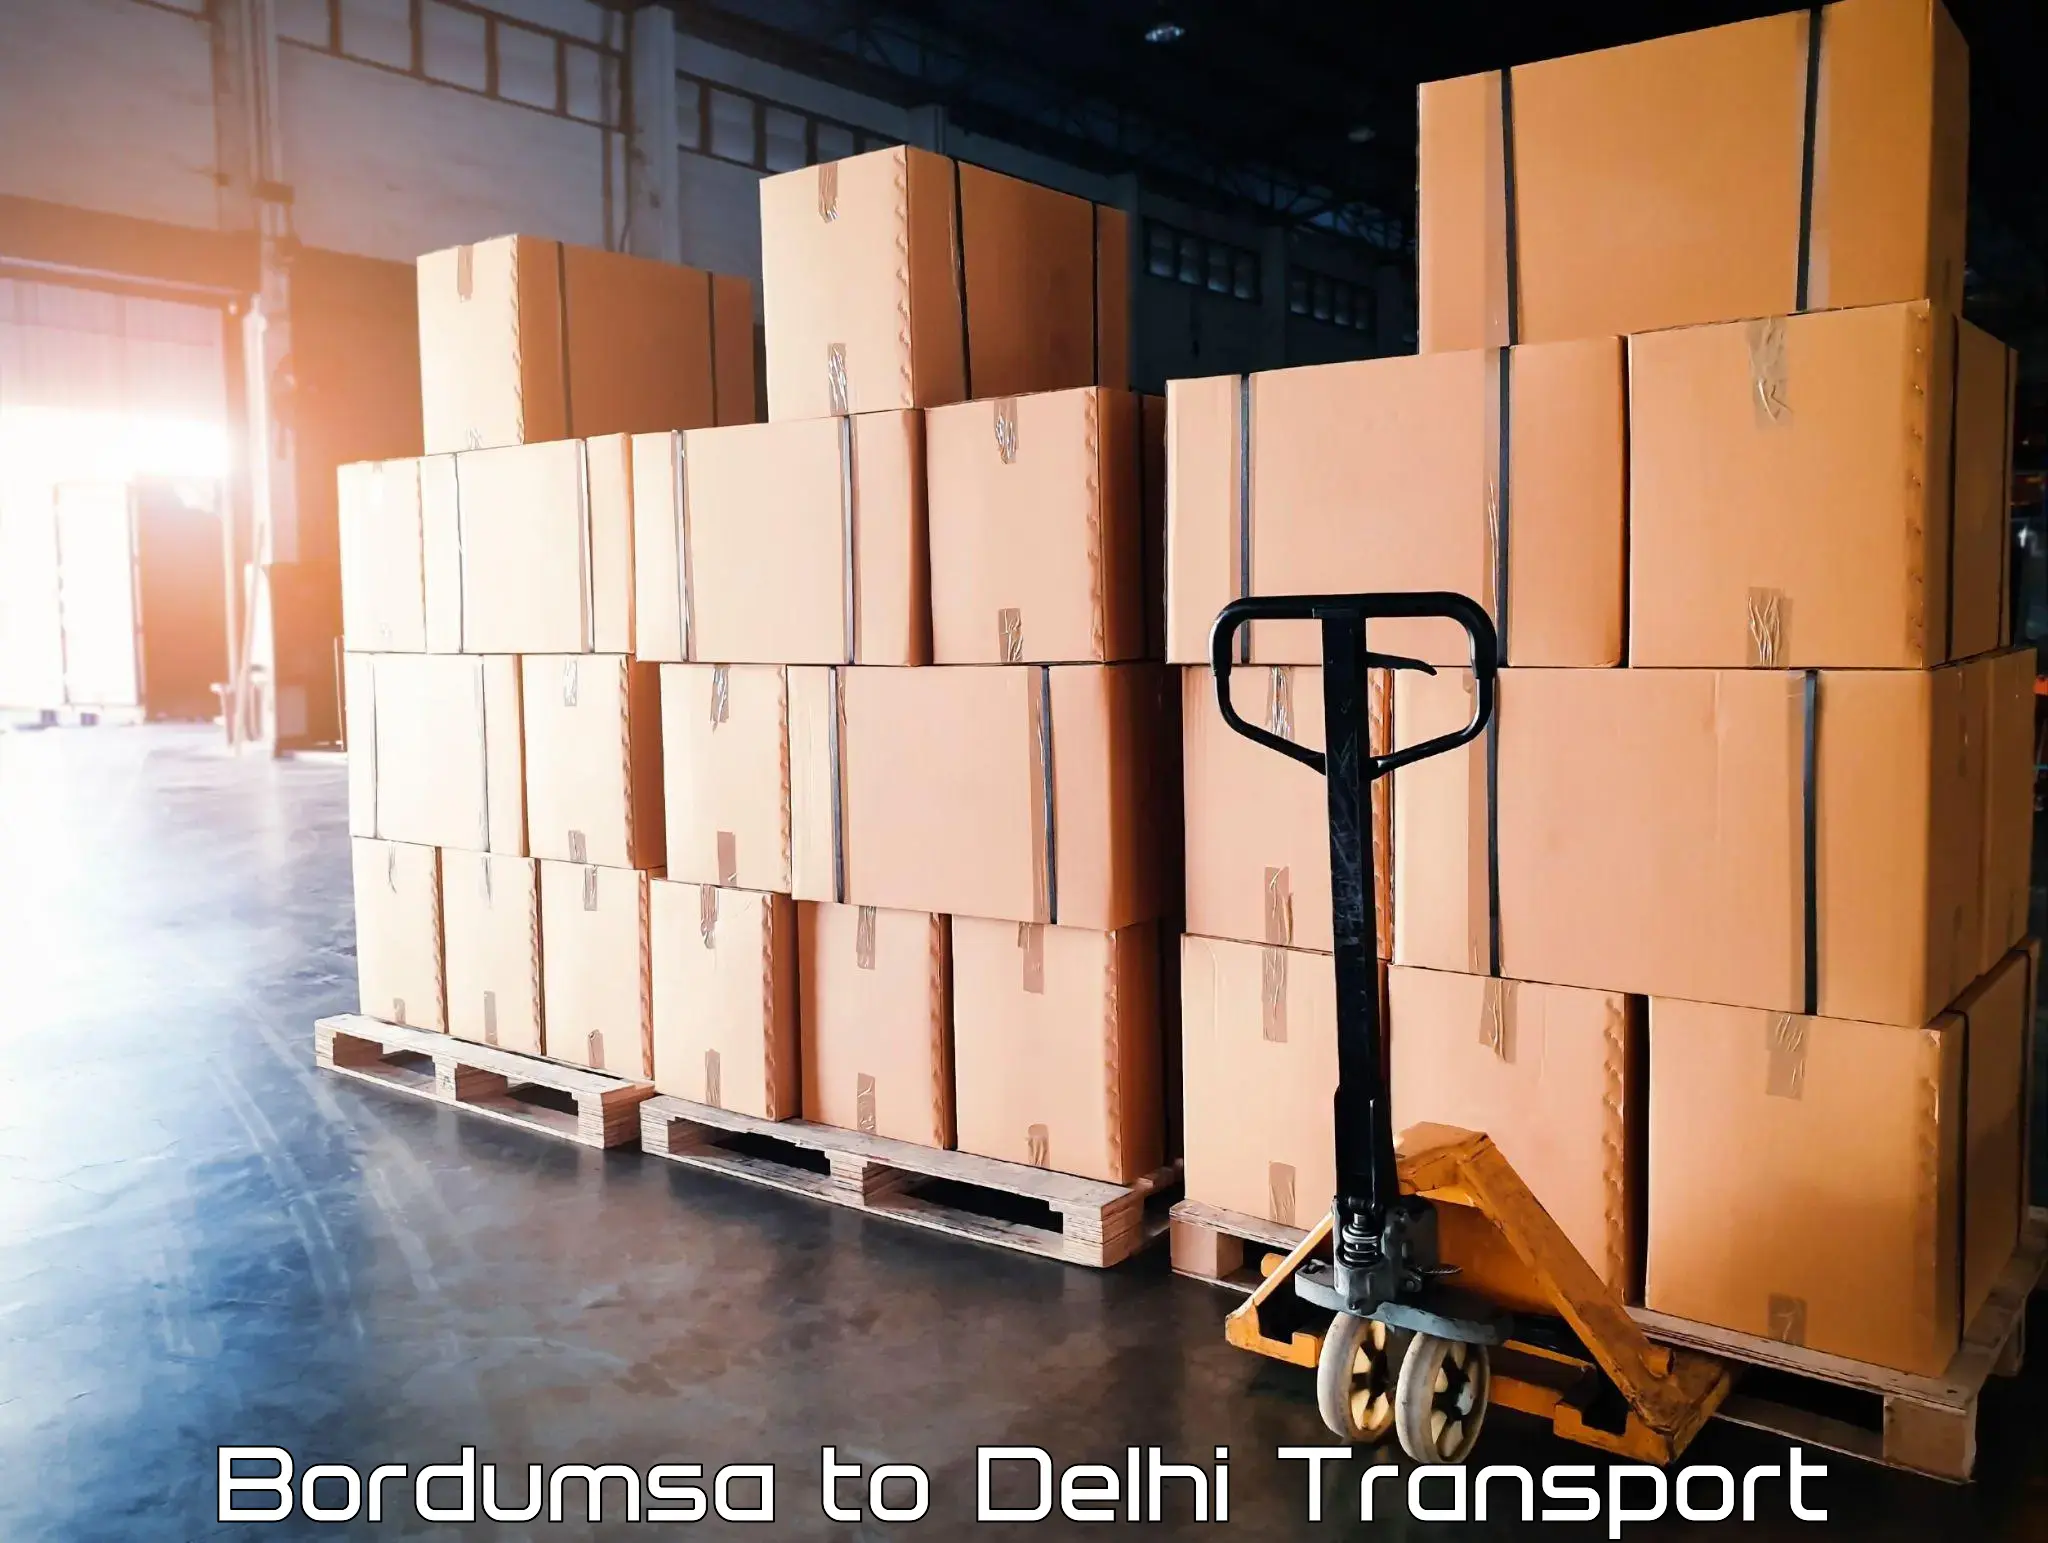 Sending bike to another city in Bordumsa to Delhi